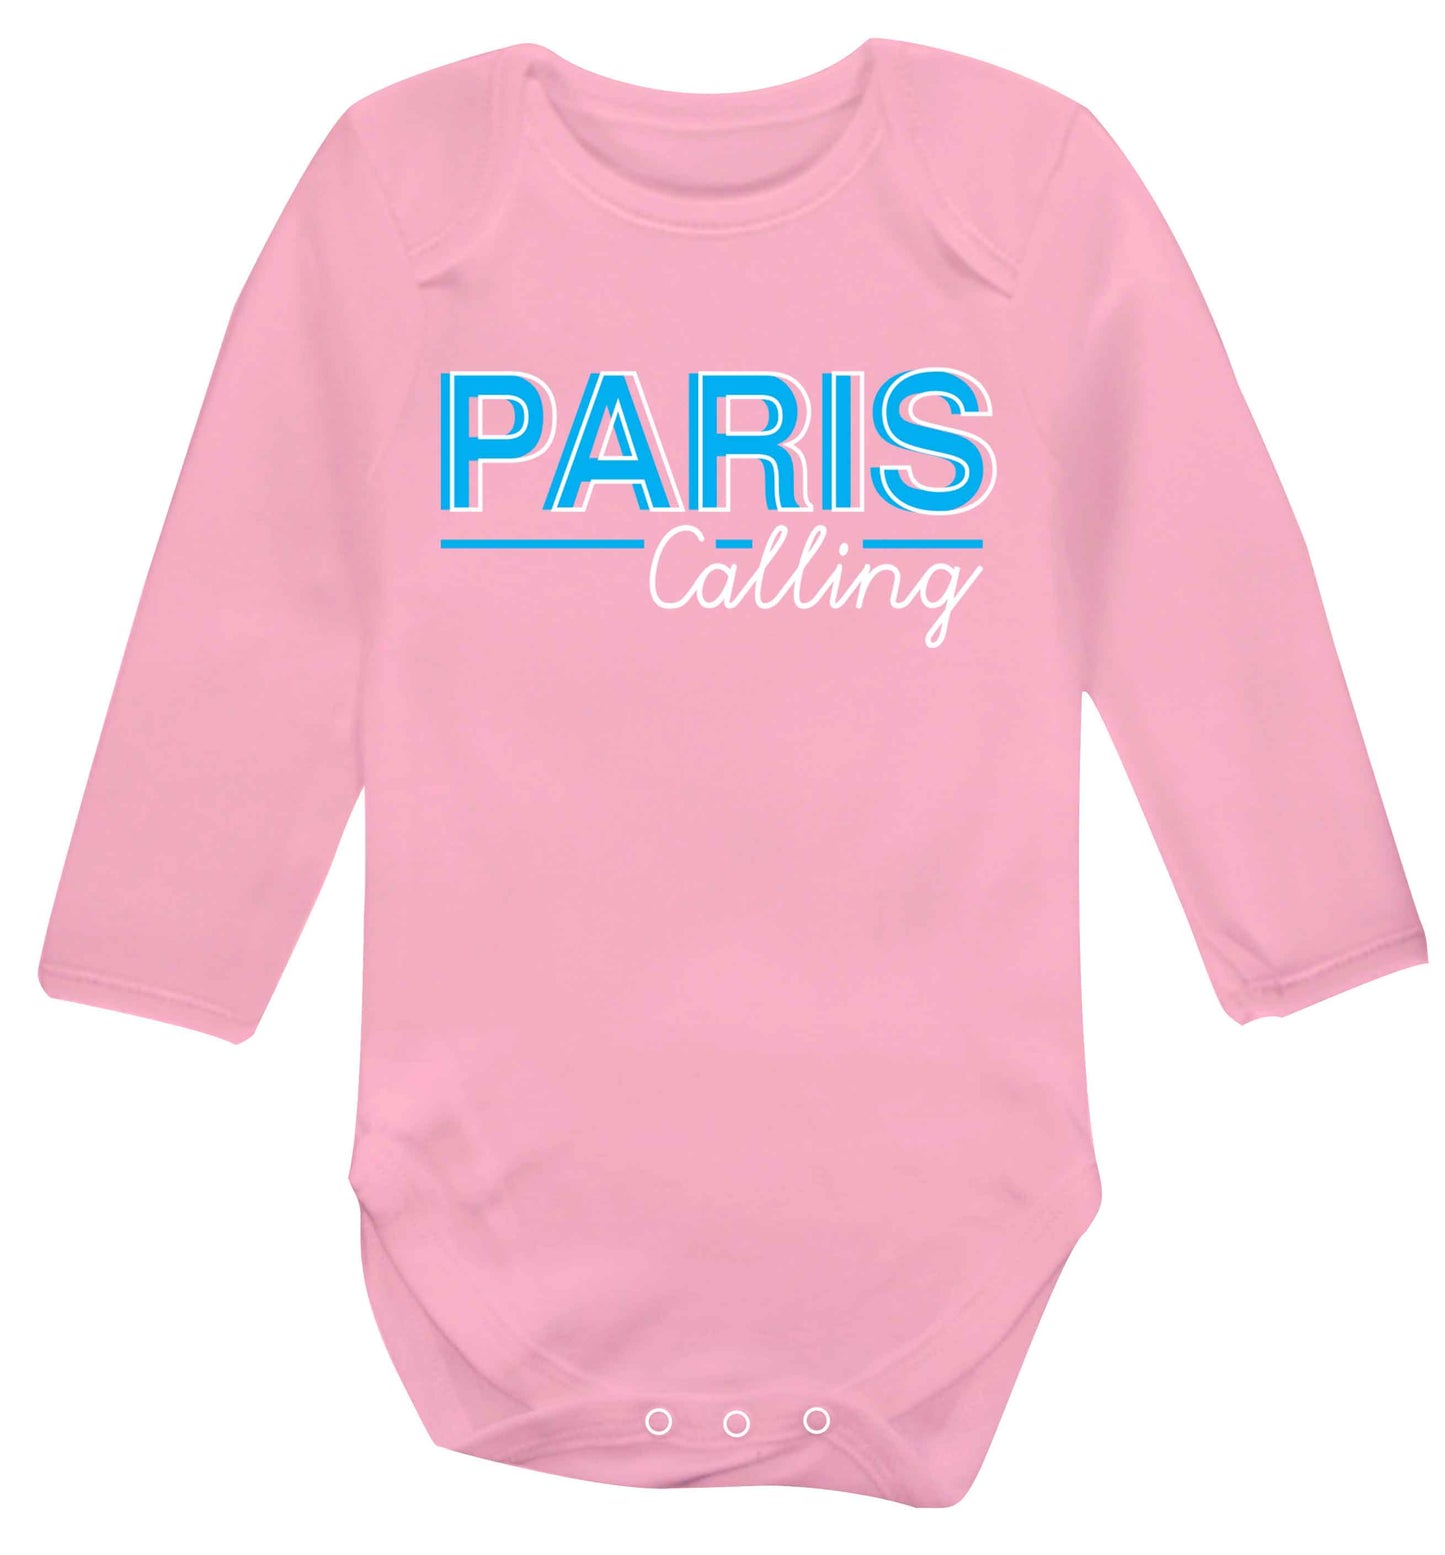 Paris calling Baby Vest long sleeved pale pink 6-12 months